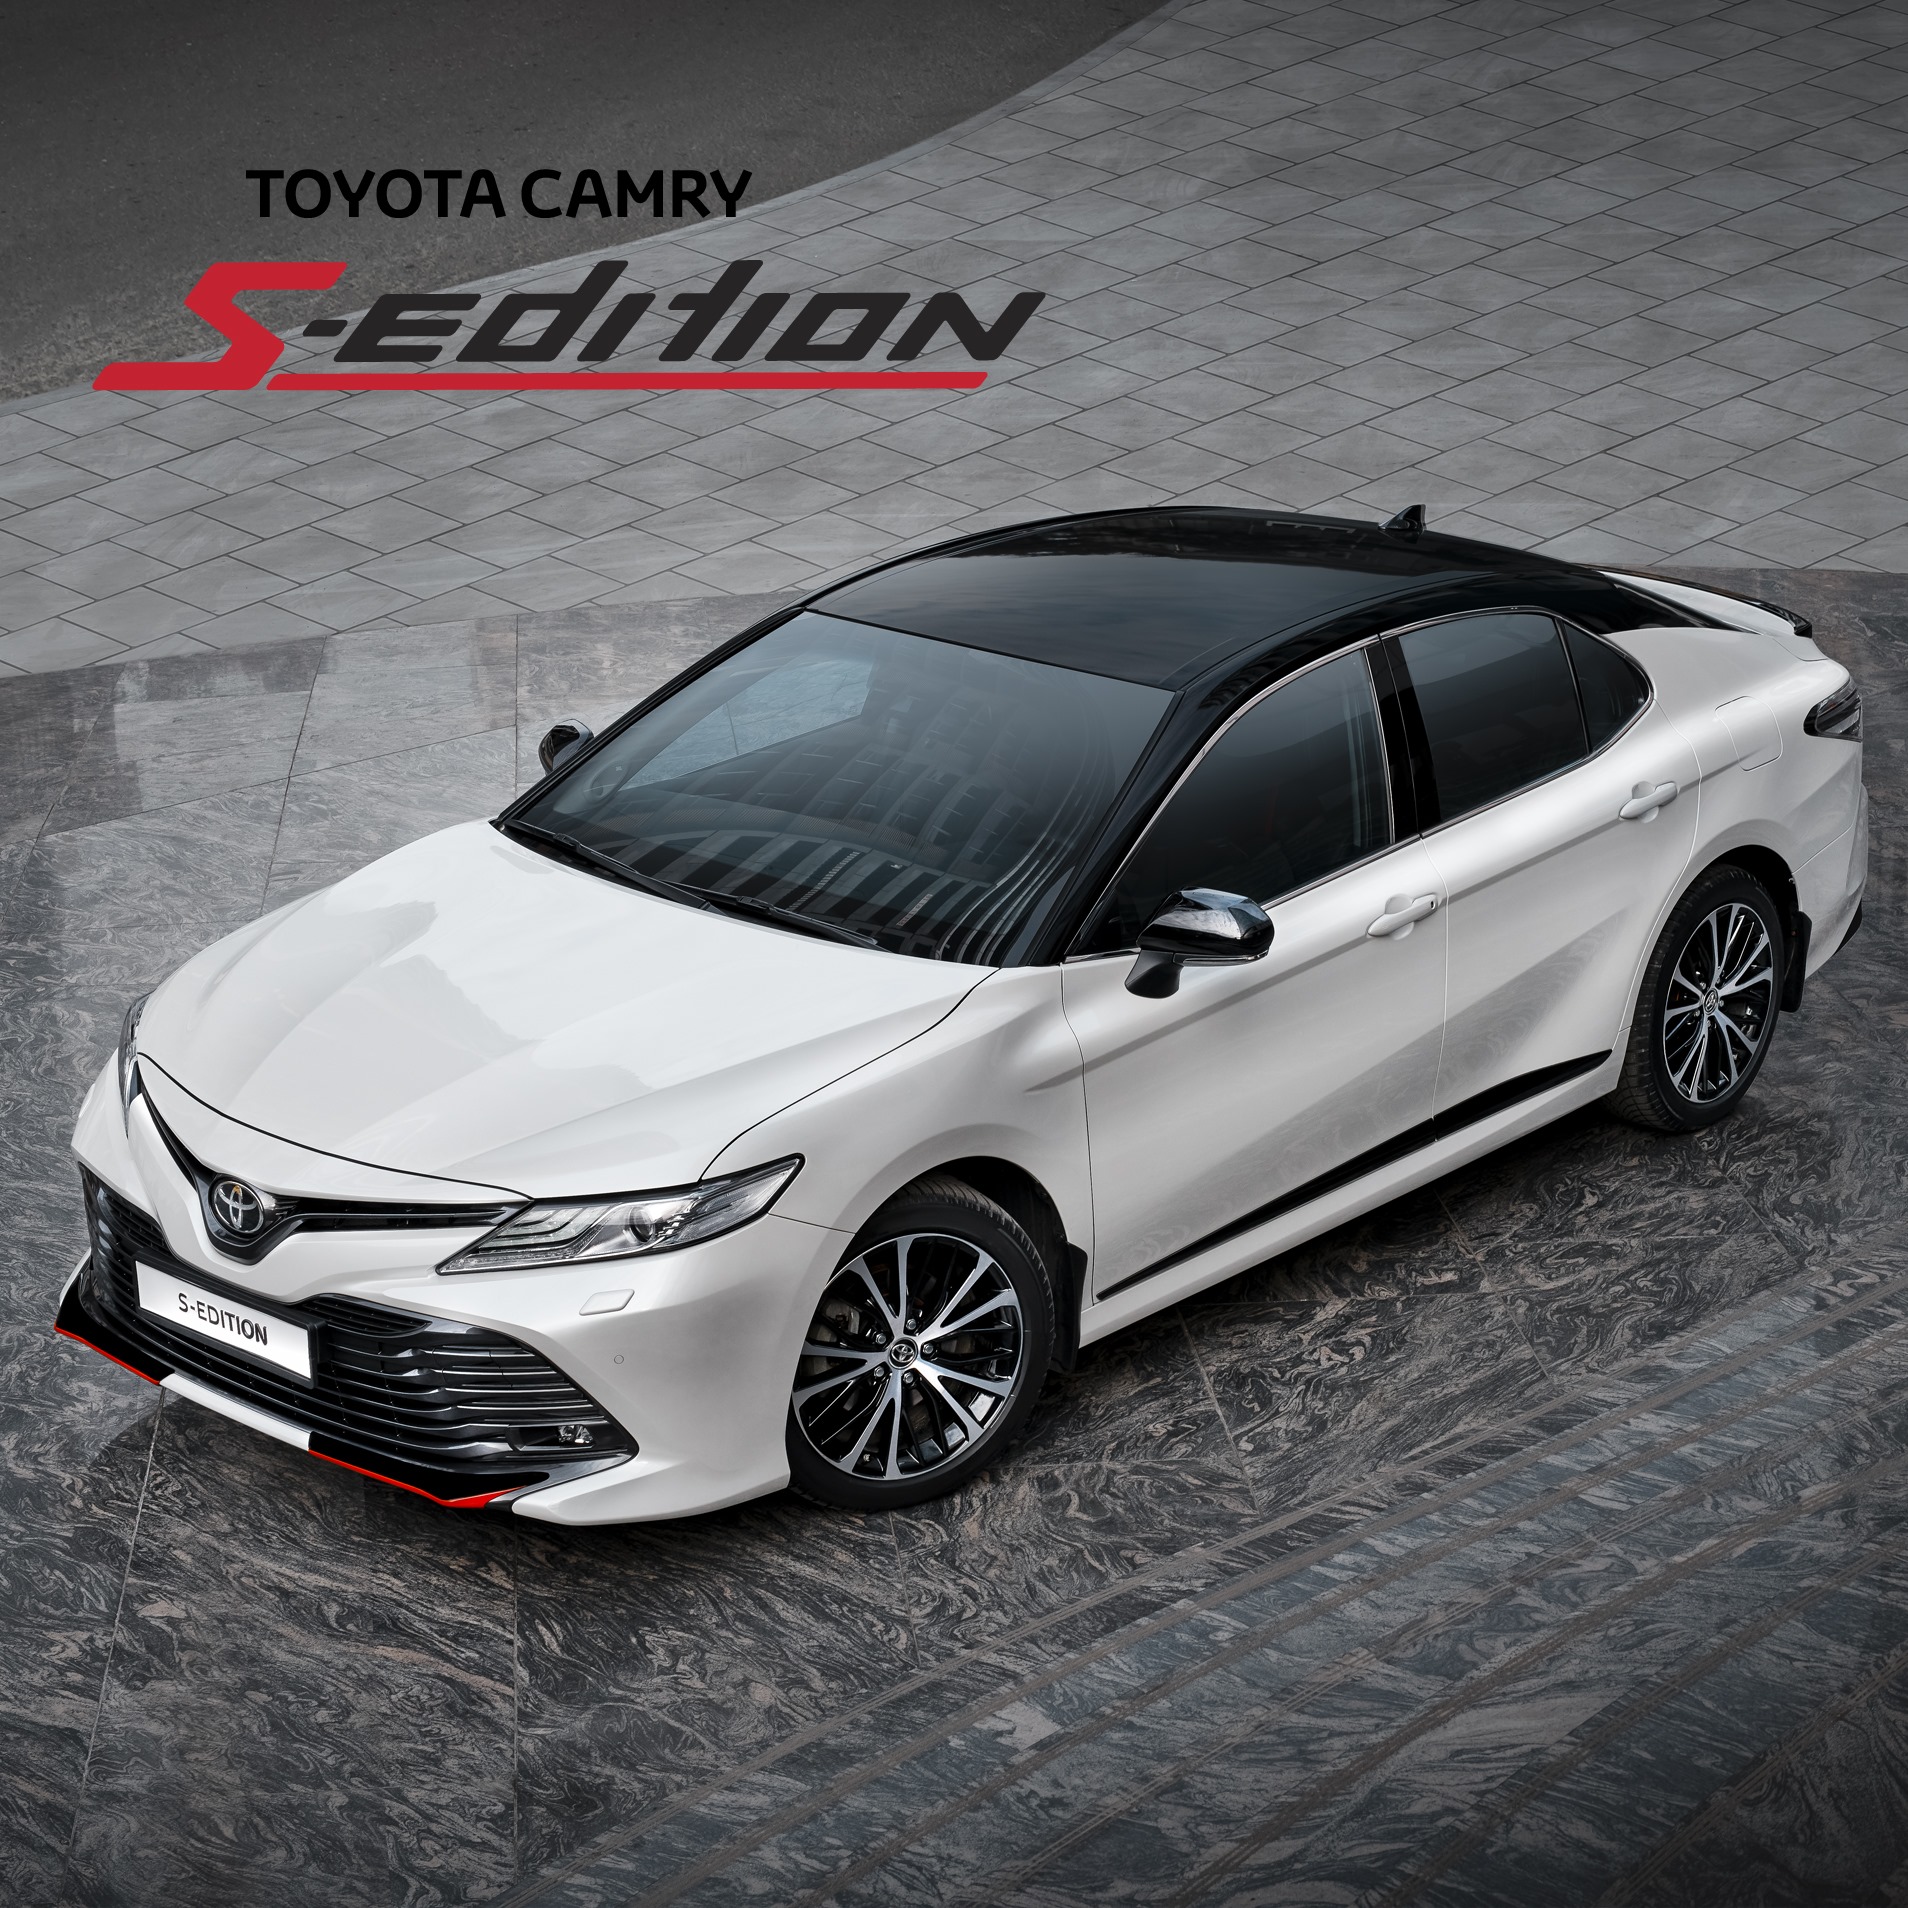 2018 - [Toyota] Camry - Page 3 2020-Toyota-Camry-S-Edition-Russian-spec-2